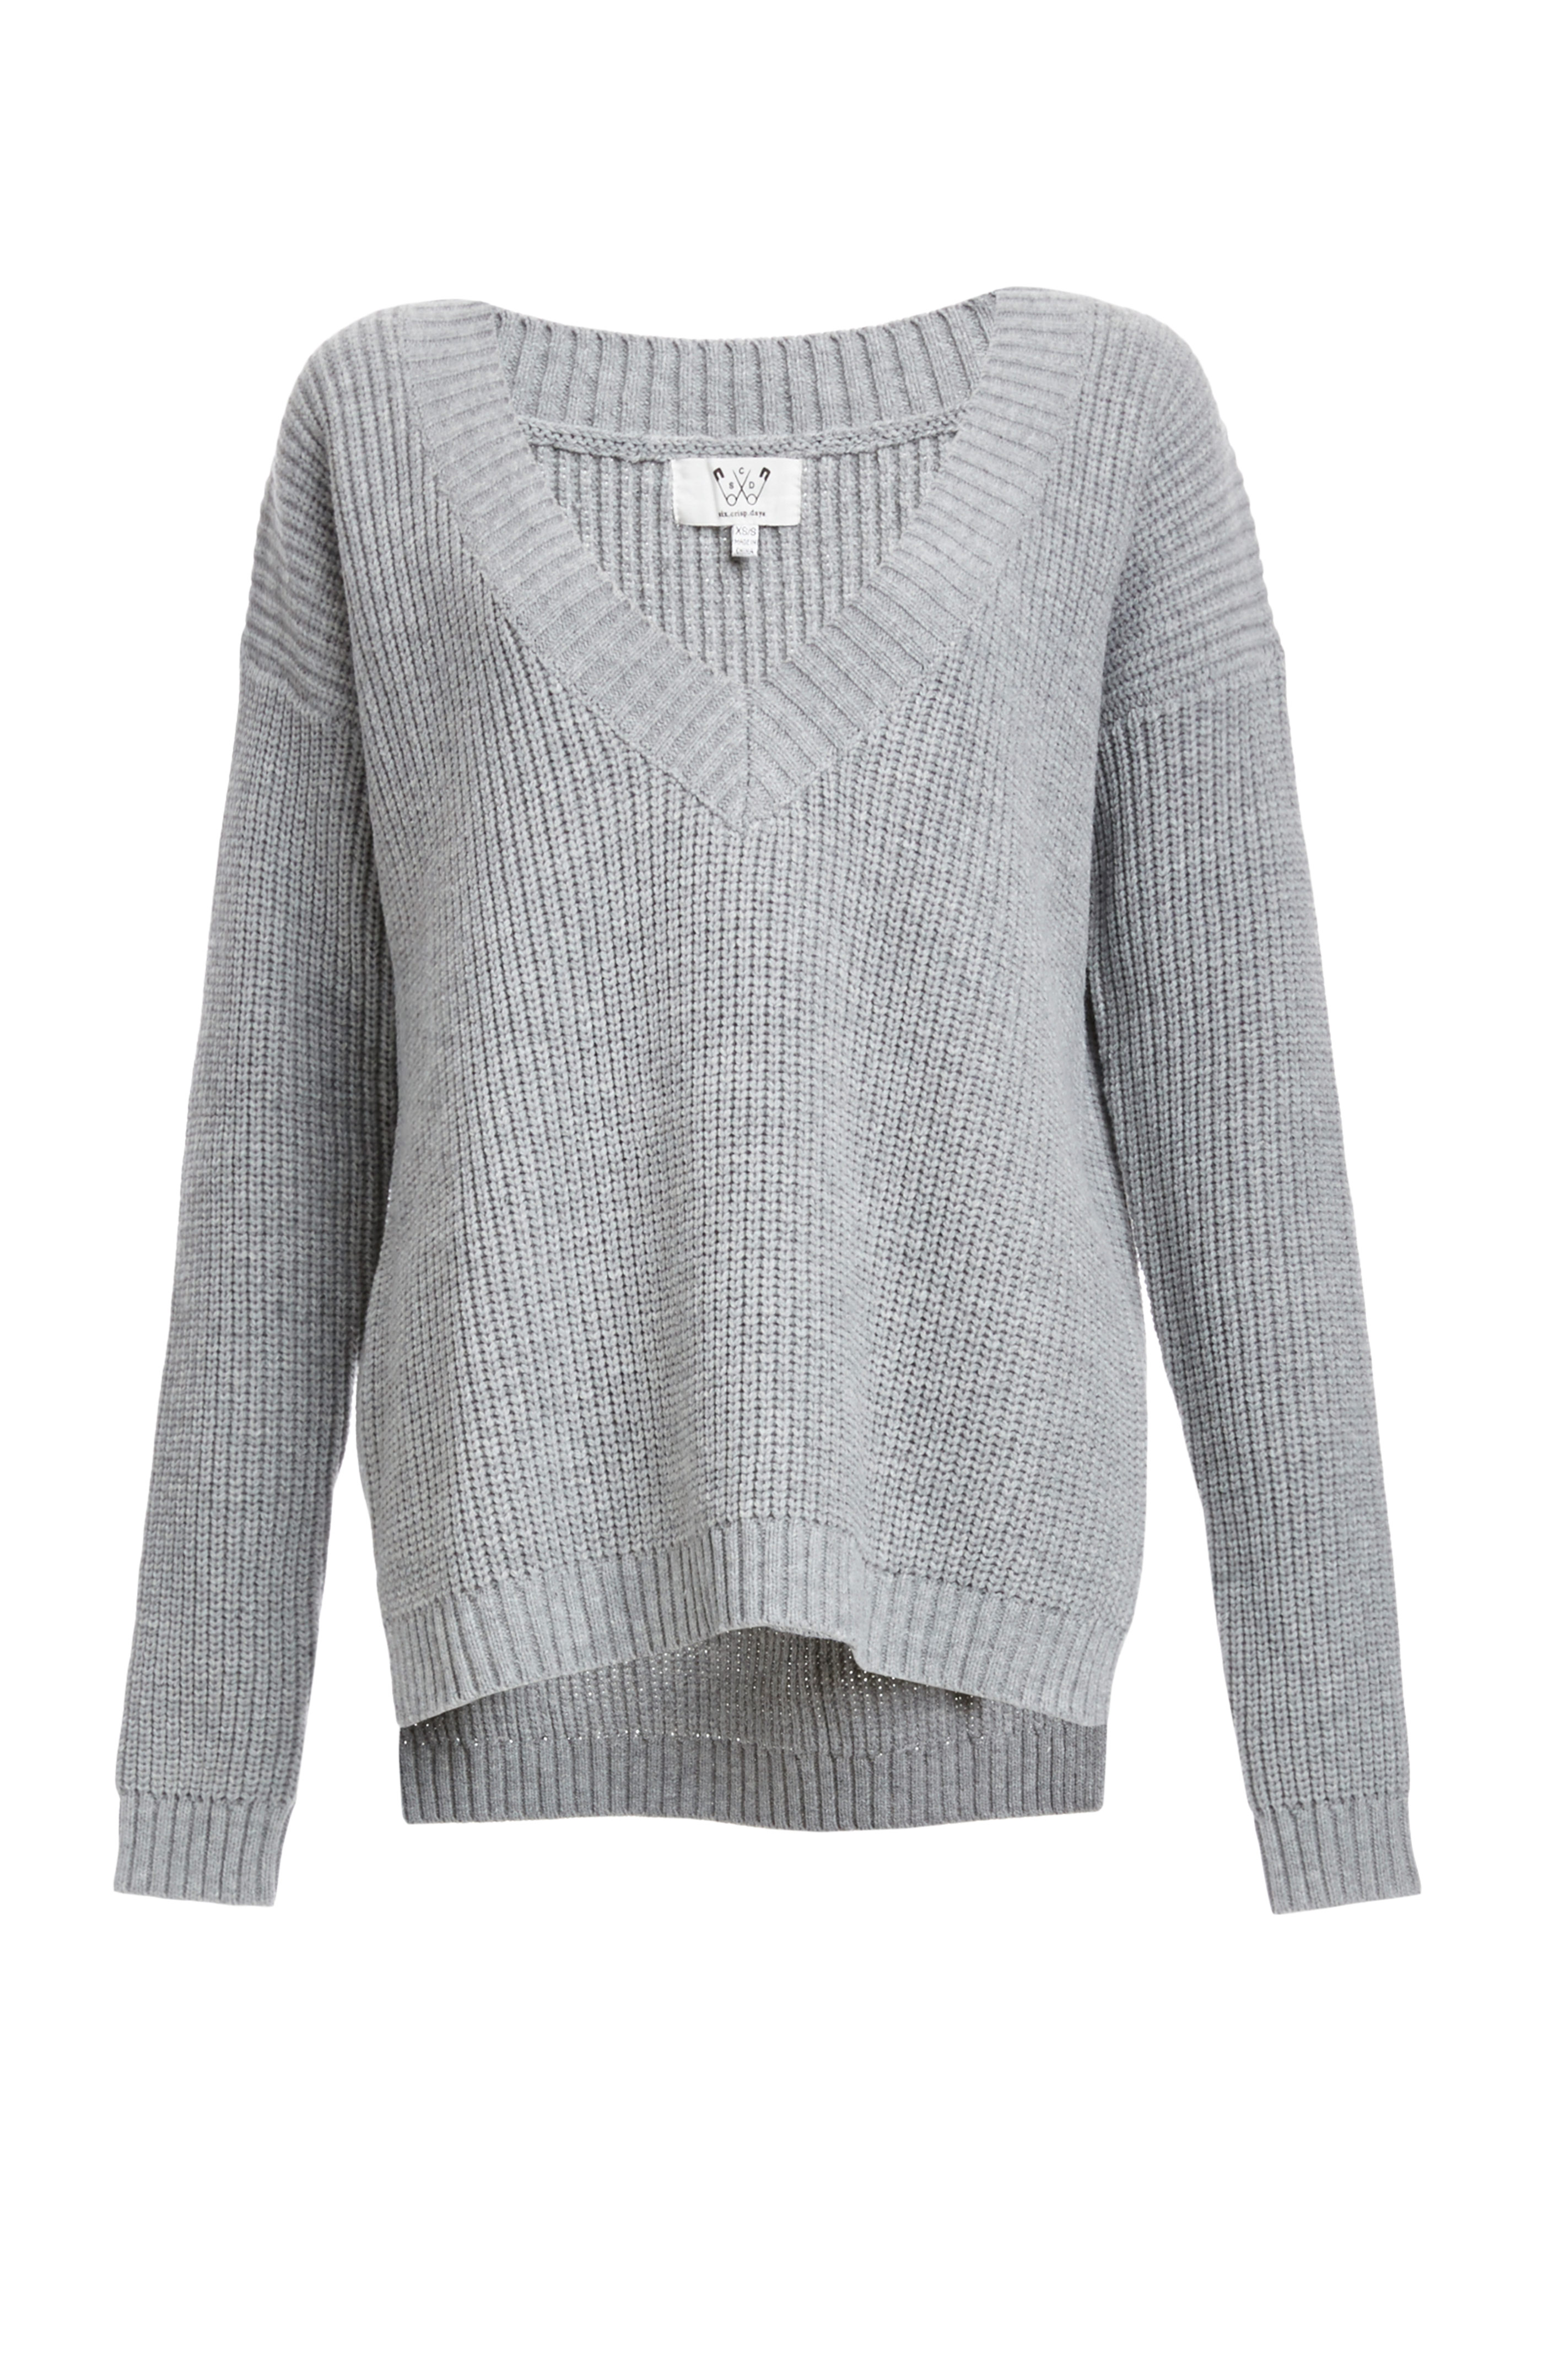 Six Crisp Days V-Neck Knit Pullover Sweater in Heather Grey | DAILYLOOK